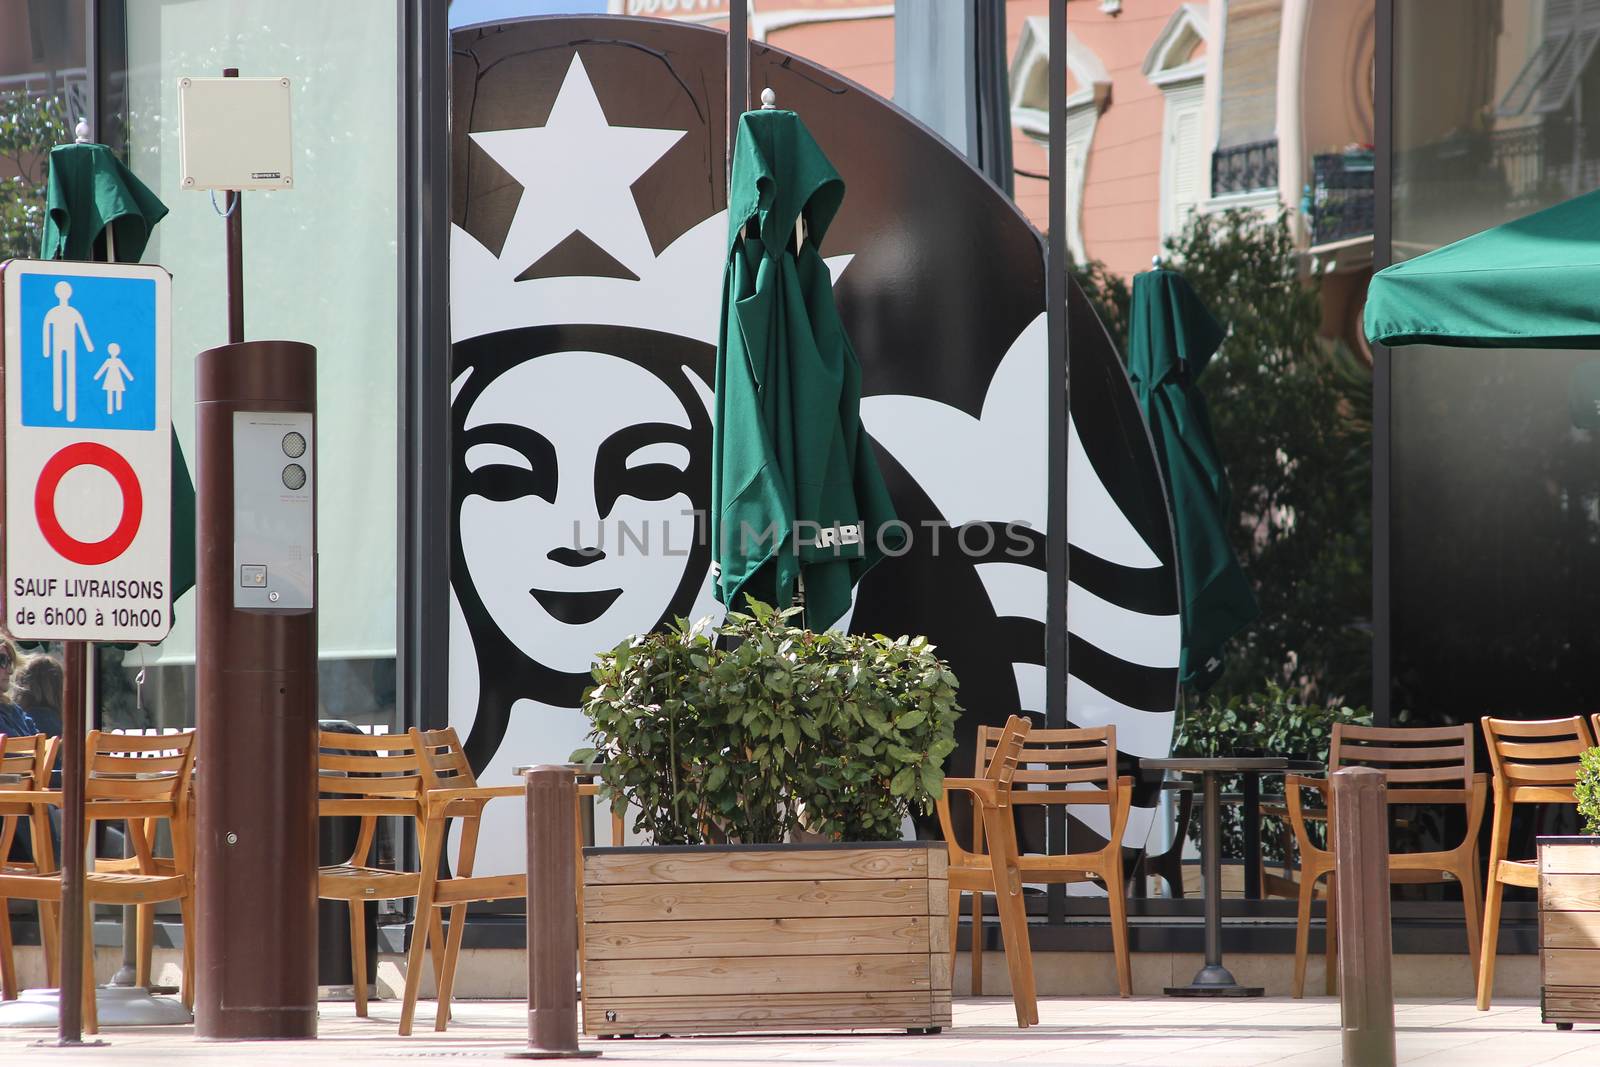 Terrace of a Restaurant and Starbucks Mermaid Sign by bensib